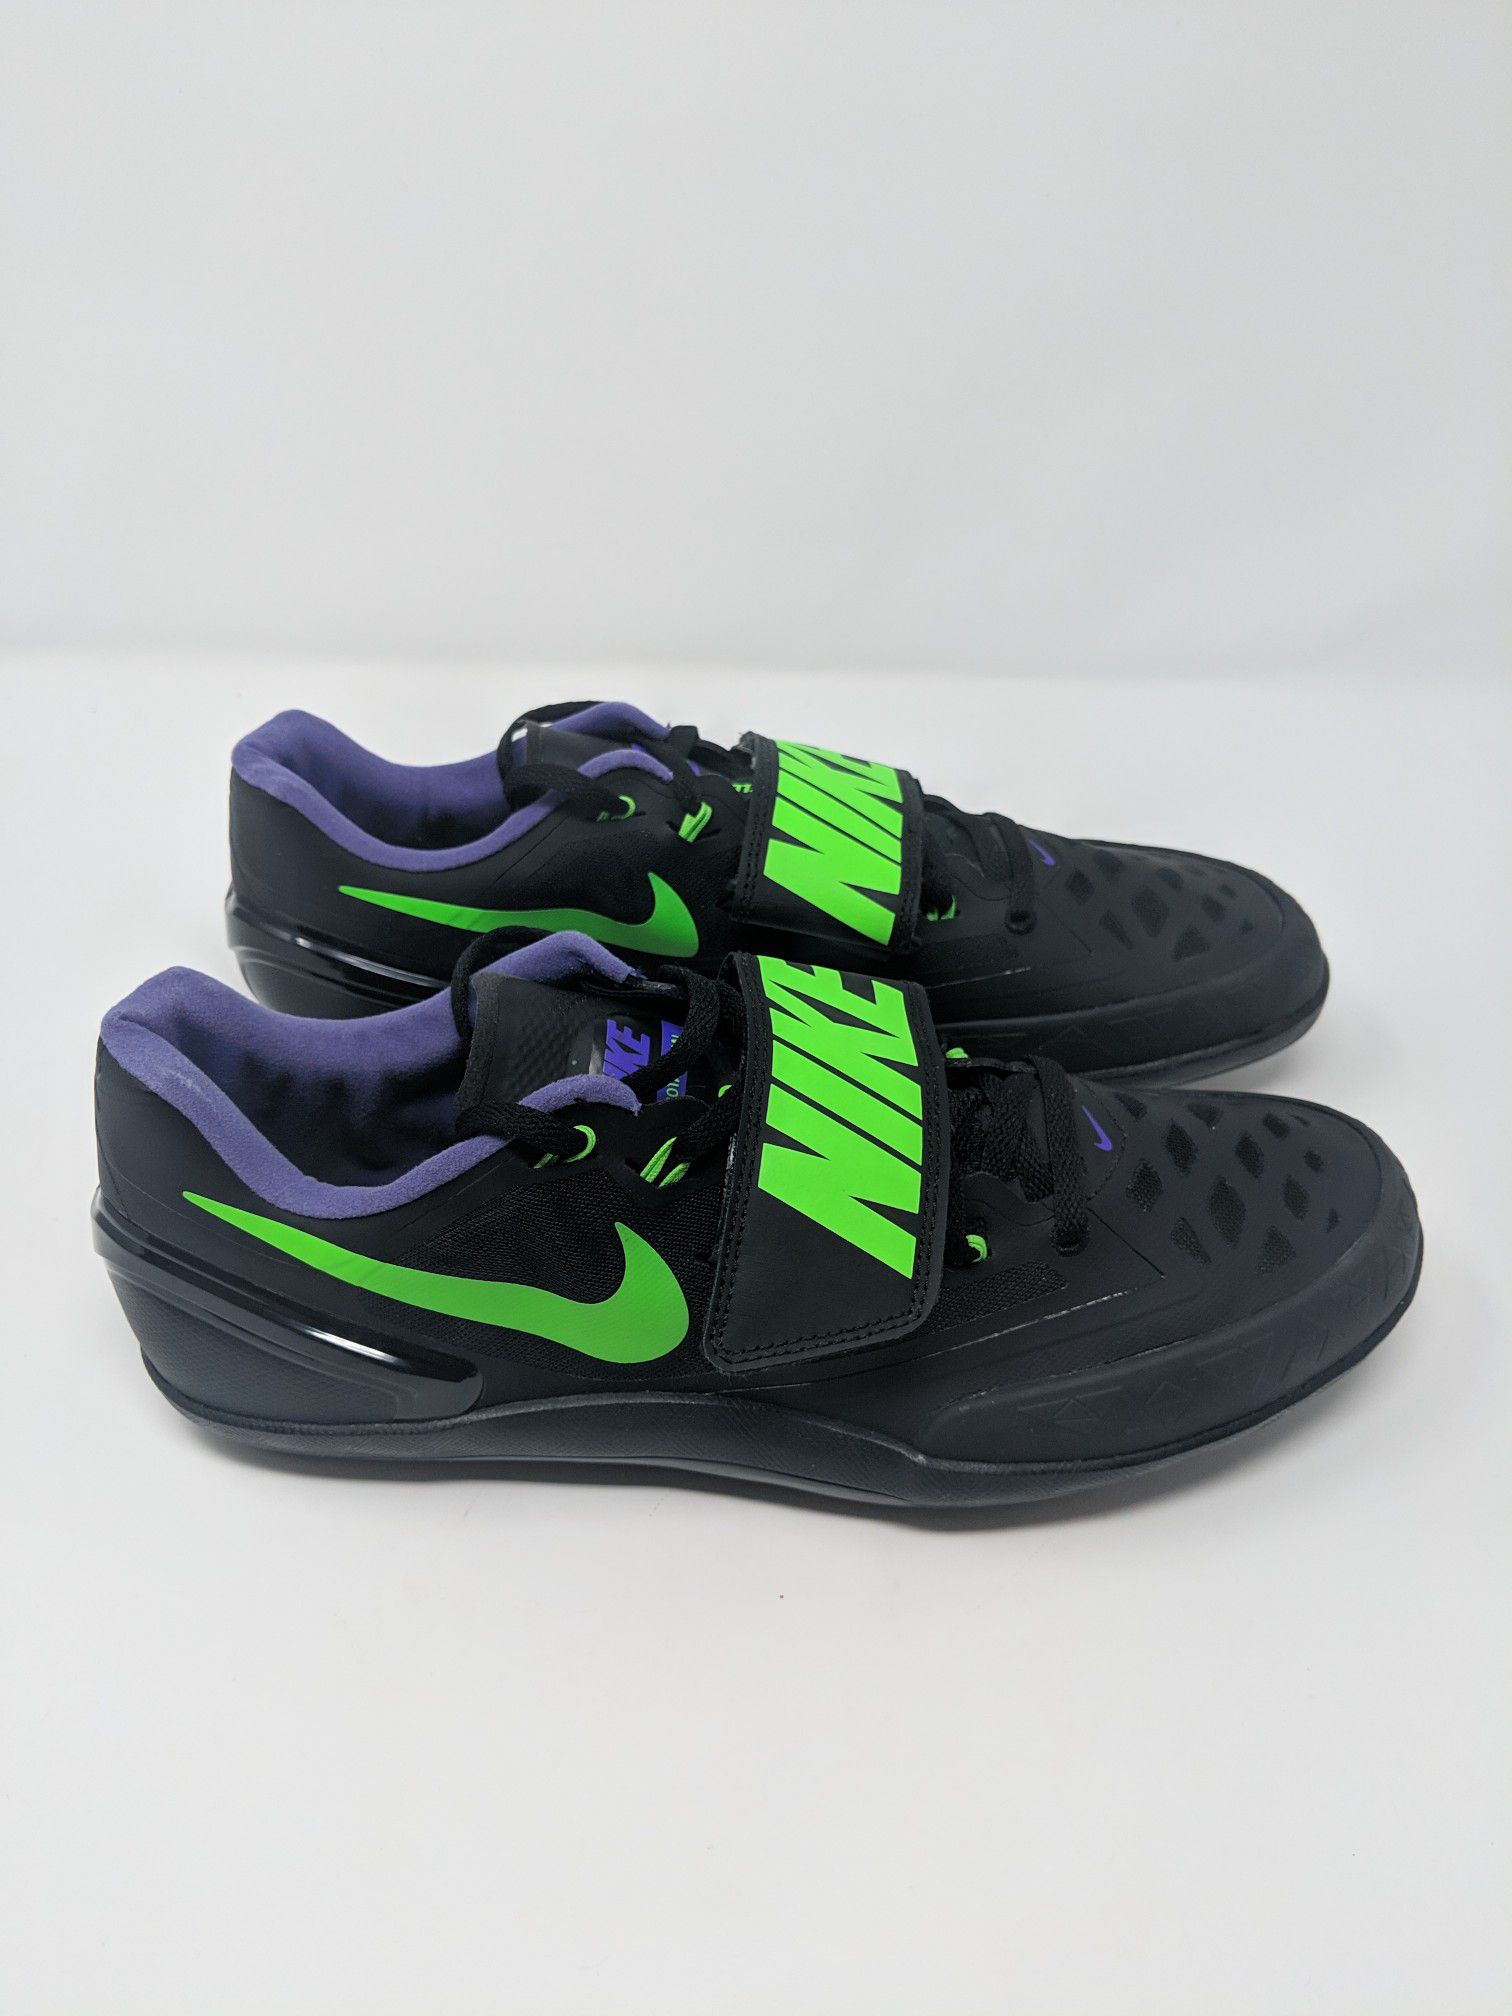 NEW NIKE ZOOM 6 Sz 11 Track & Field Shot Put Discus 685131-035. code 685131-035 for Sale in MN - OfferUp